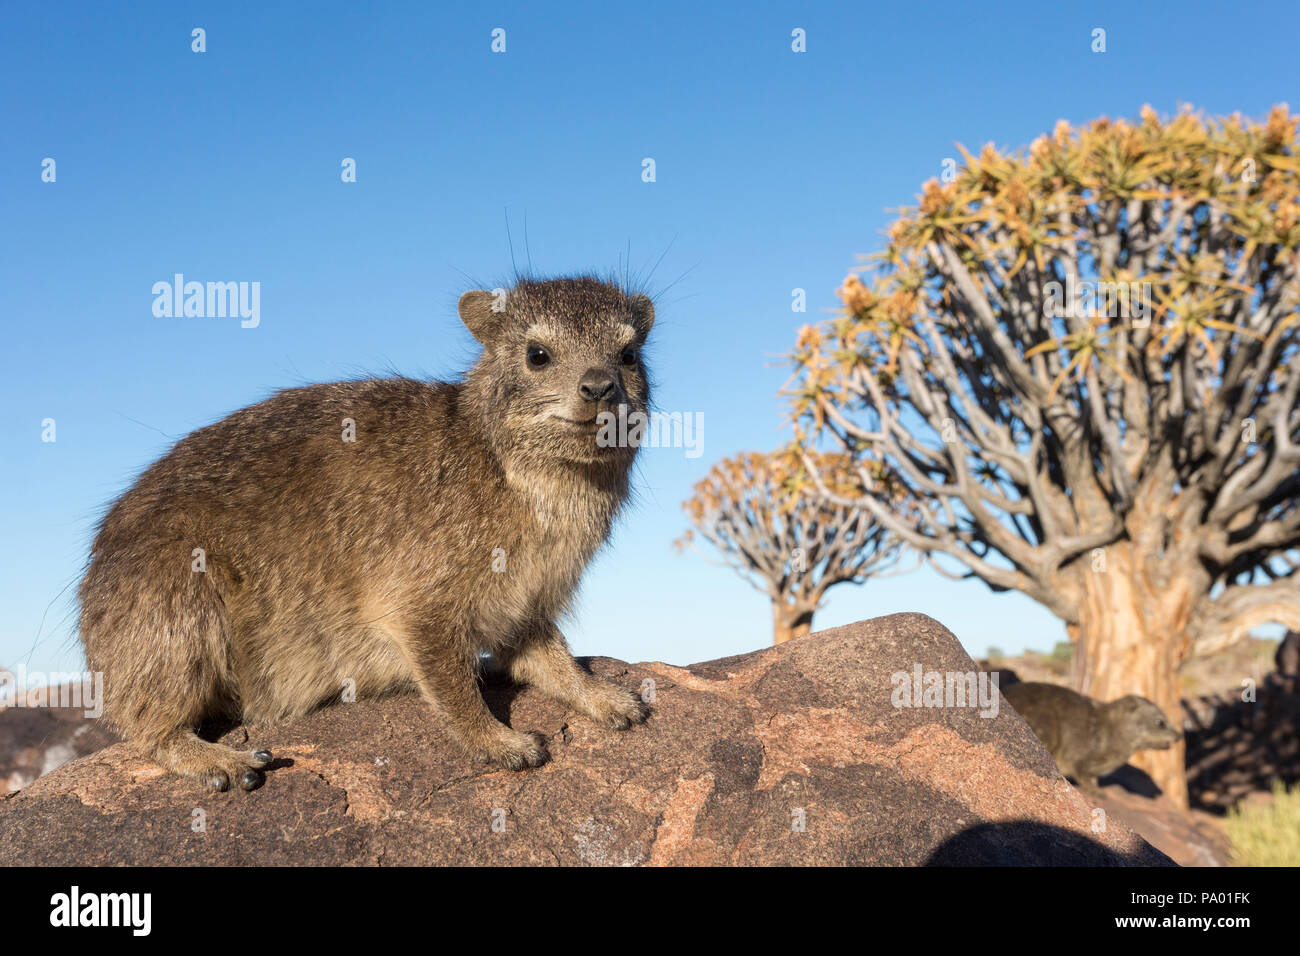 Rock hyrax (Procavia capensis), Quiver Tree Forest, Keetmanshoop, Namibia Stock Photo